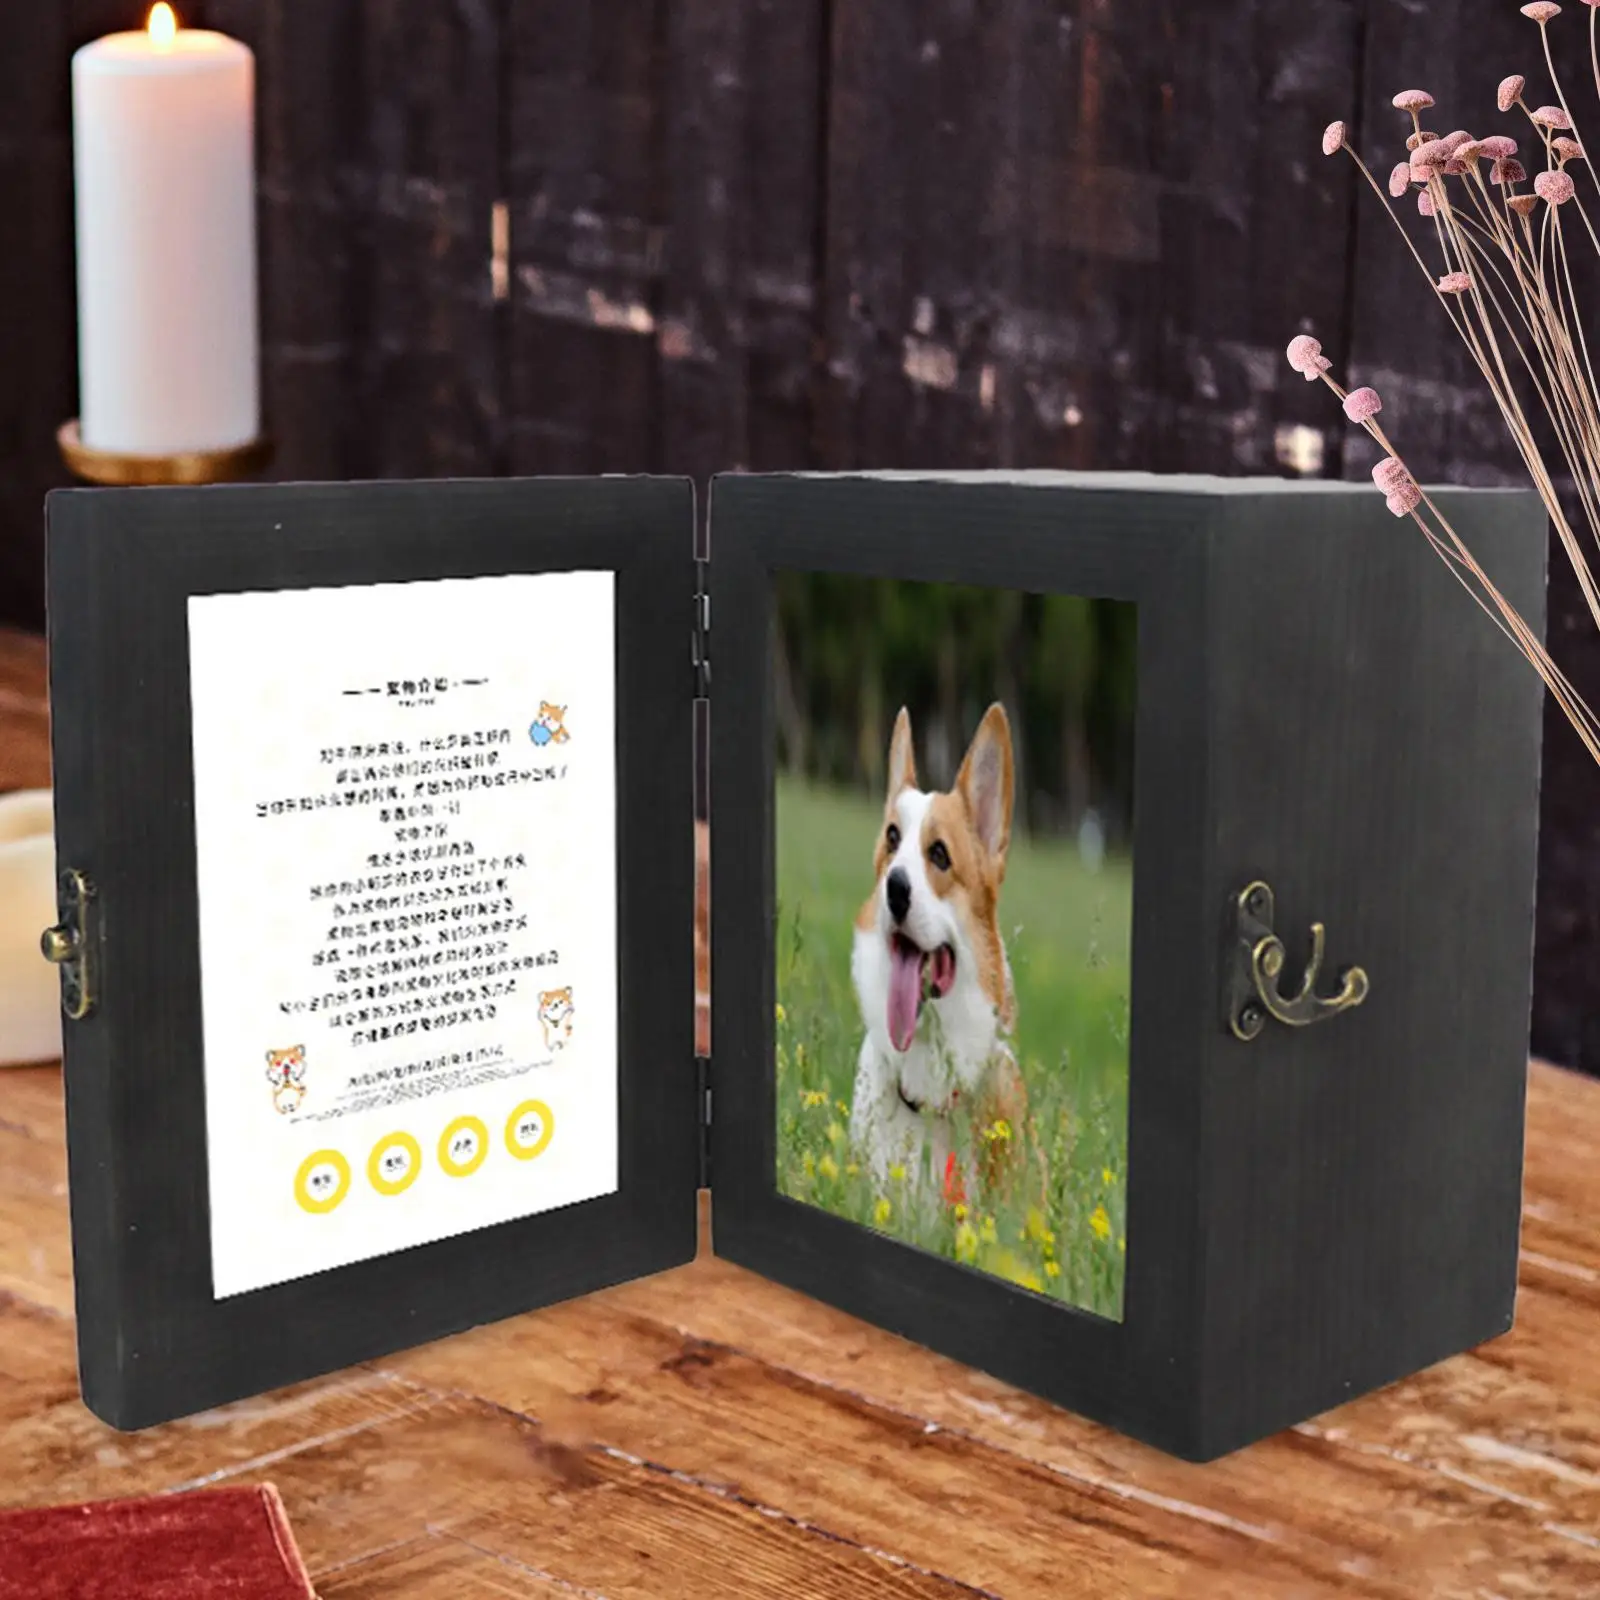 Wooden Pet Cremation Urn for Dogs Cats Commemorate Cinerary Casket Funeral